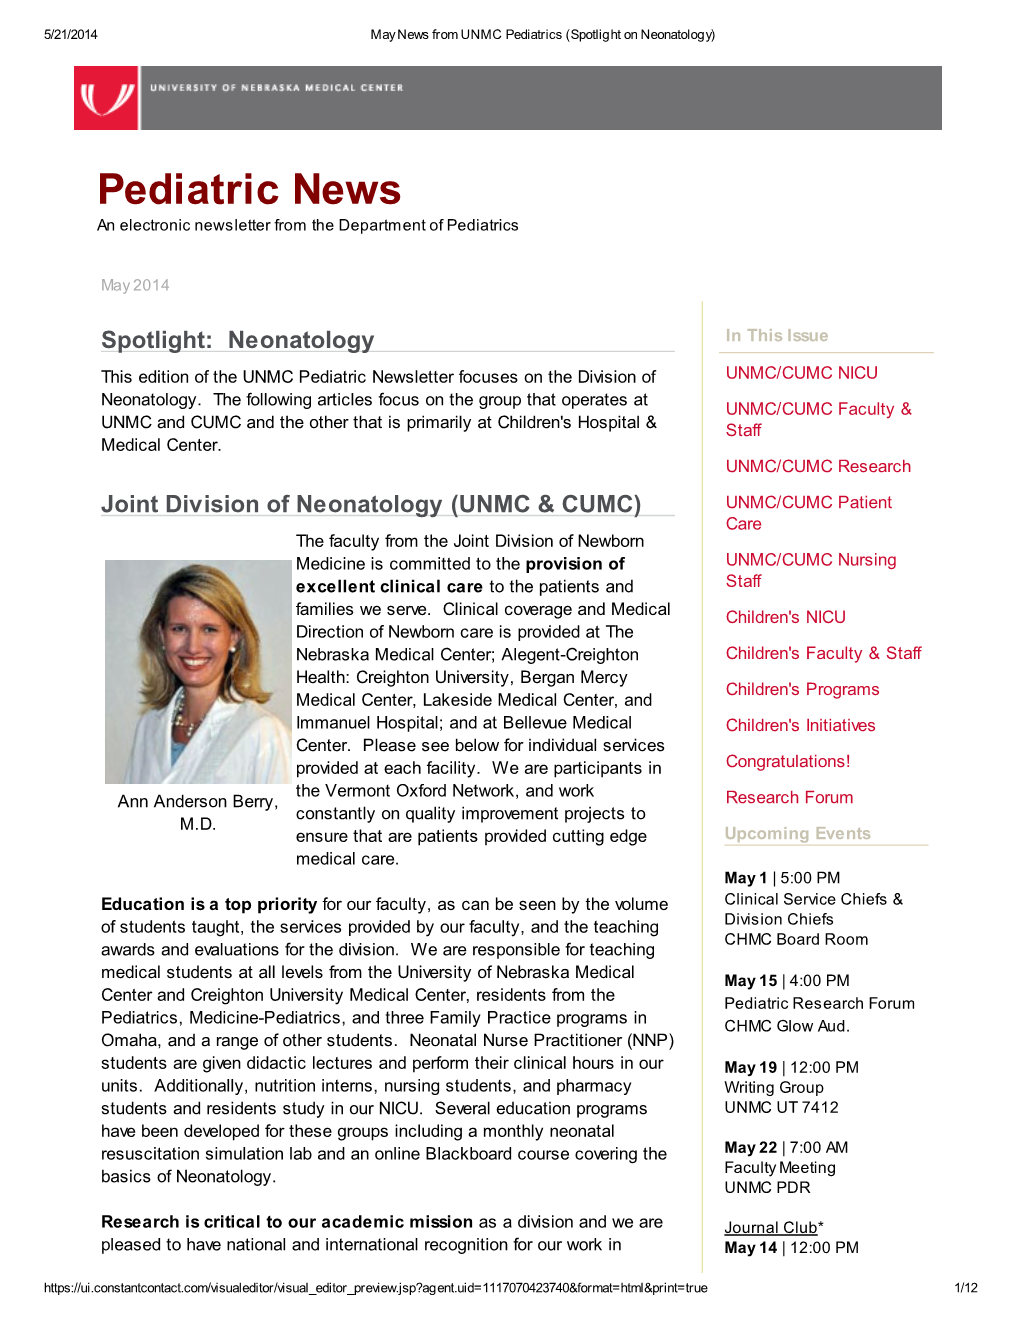 Pediatric News an Electronic Newsletter from the Department of Pediatrics